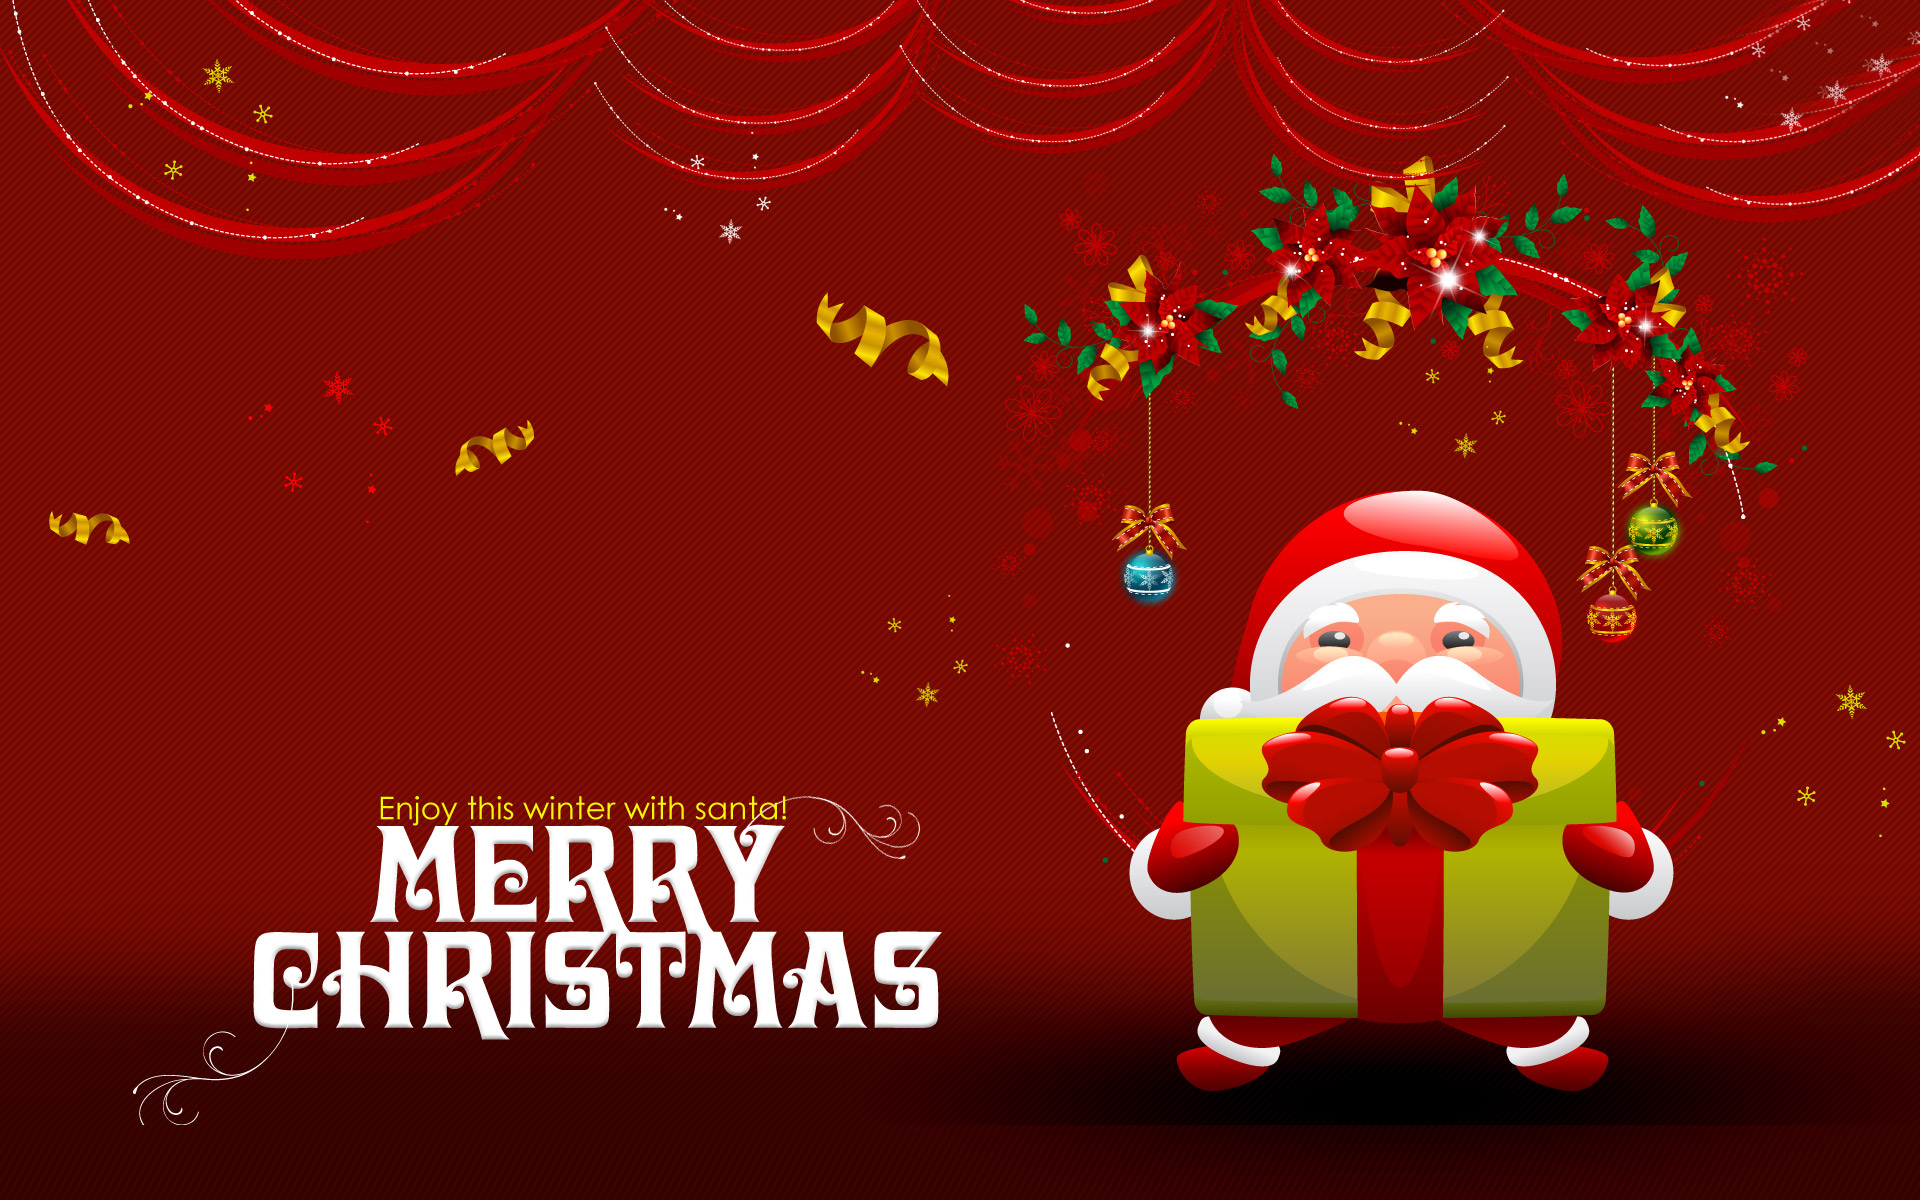 Download Free Merry Christmas Wallpaper Red 2016.